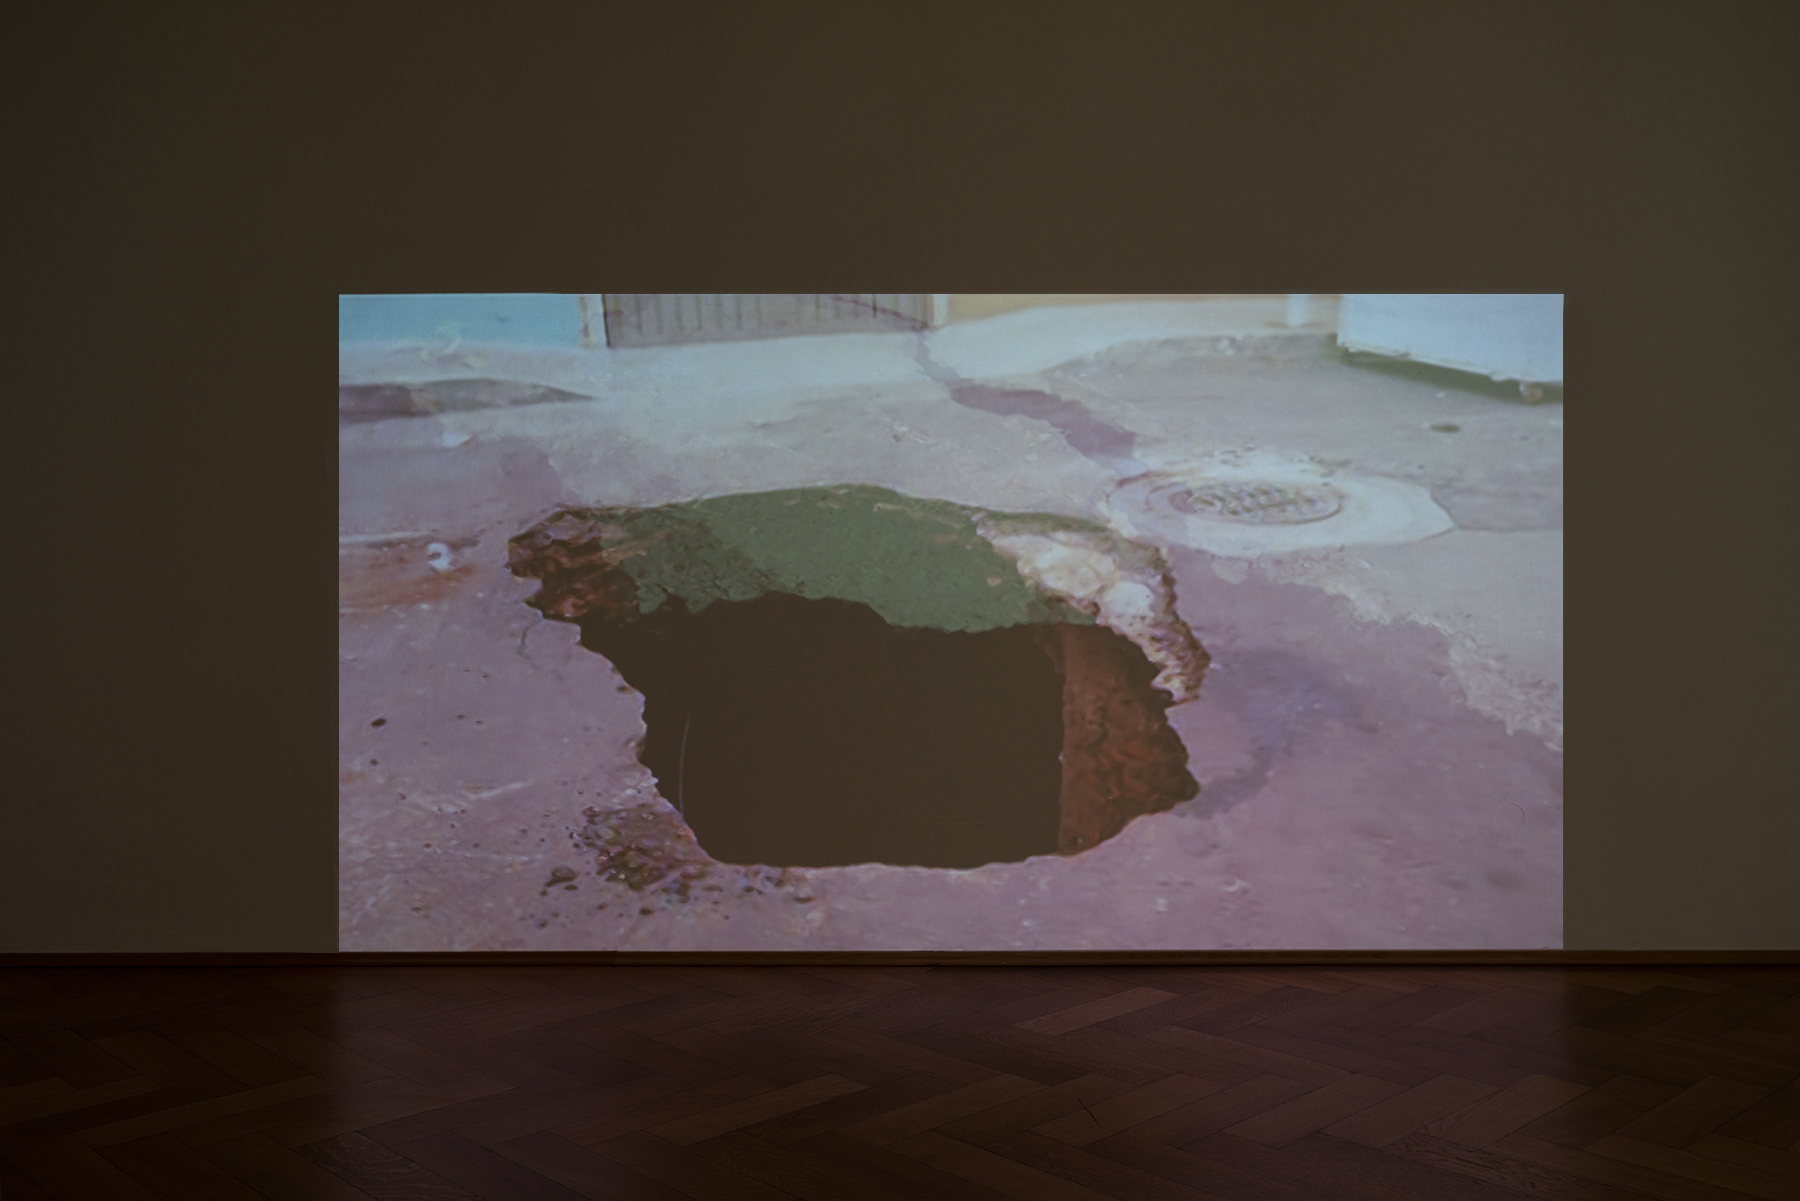 Miguel Calderón, Socavón (Sinkhole), 2020, Installation view "The world is not like us...", Britta Rettberg, 2020, Cour tesy of the artist and kurimanzutto, Mexico City